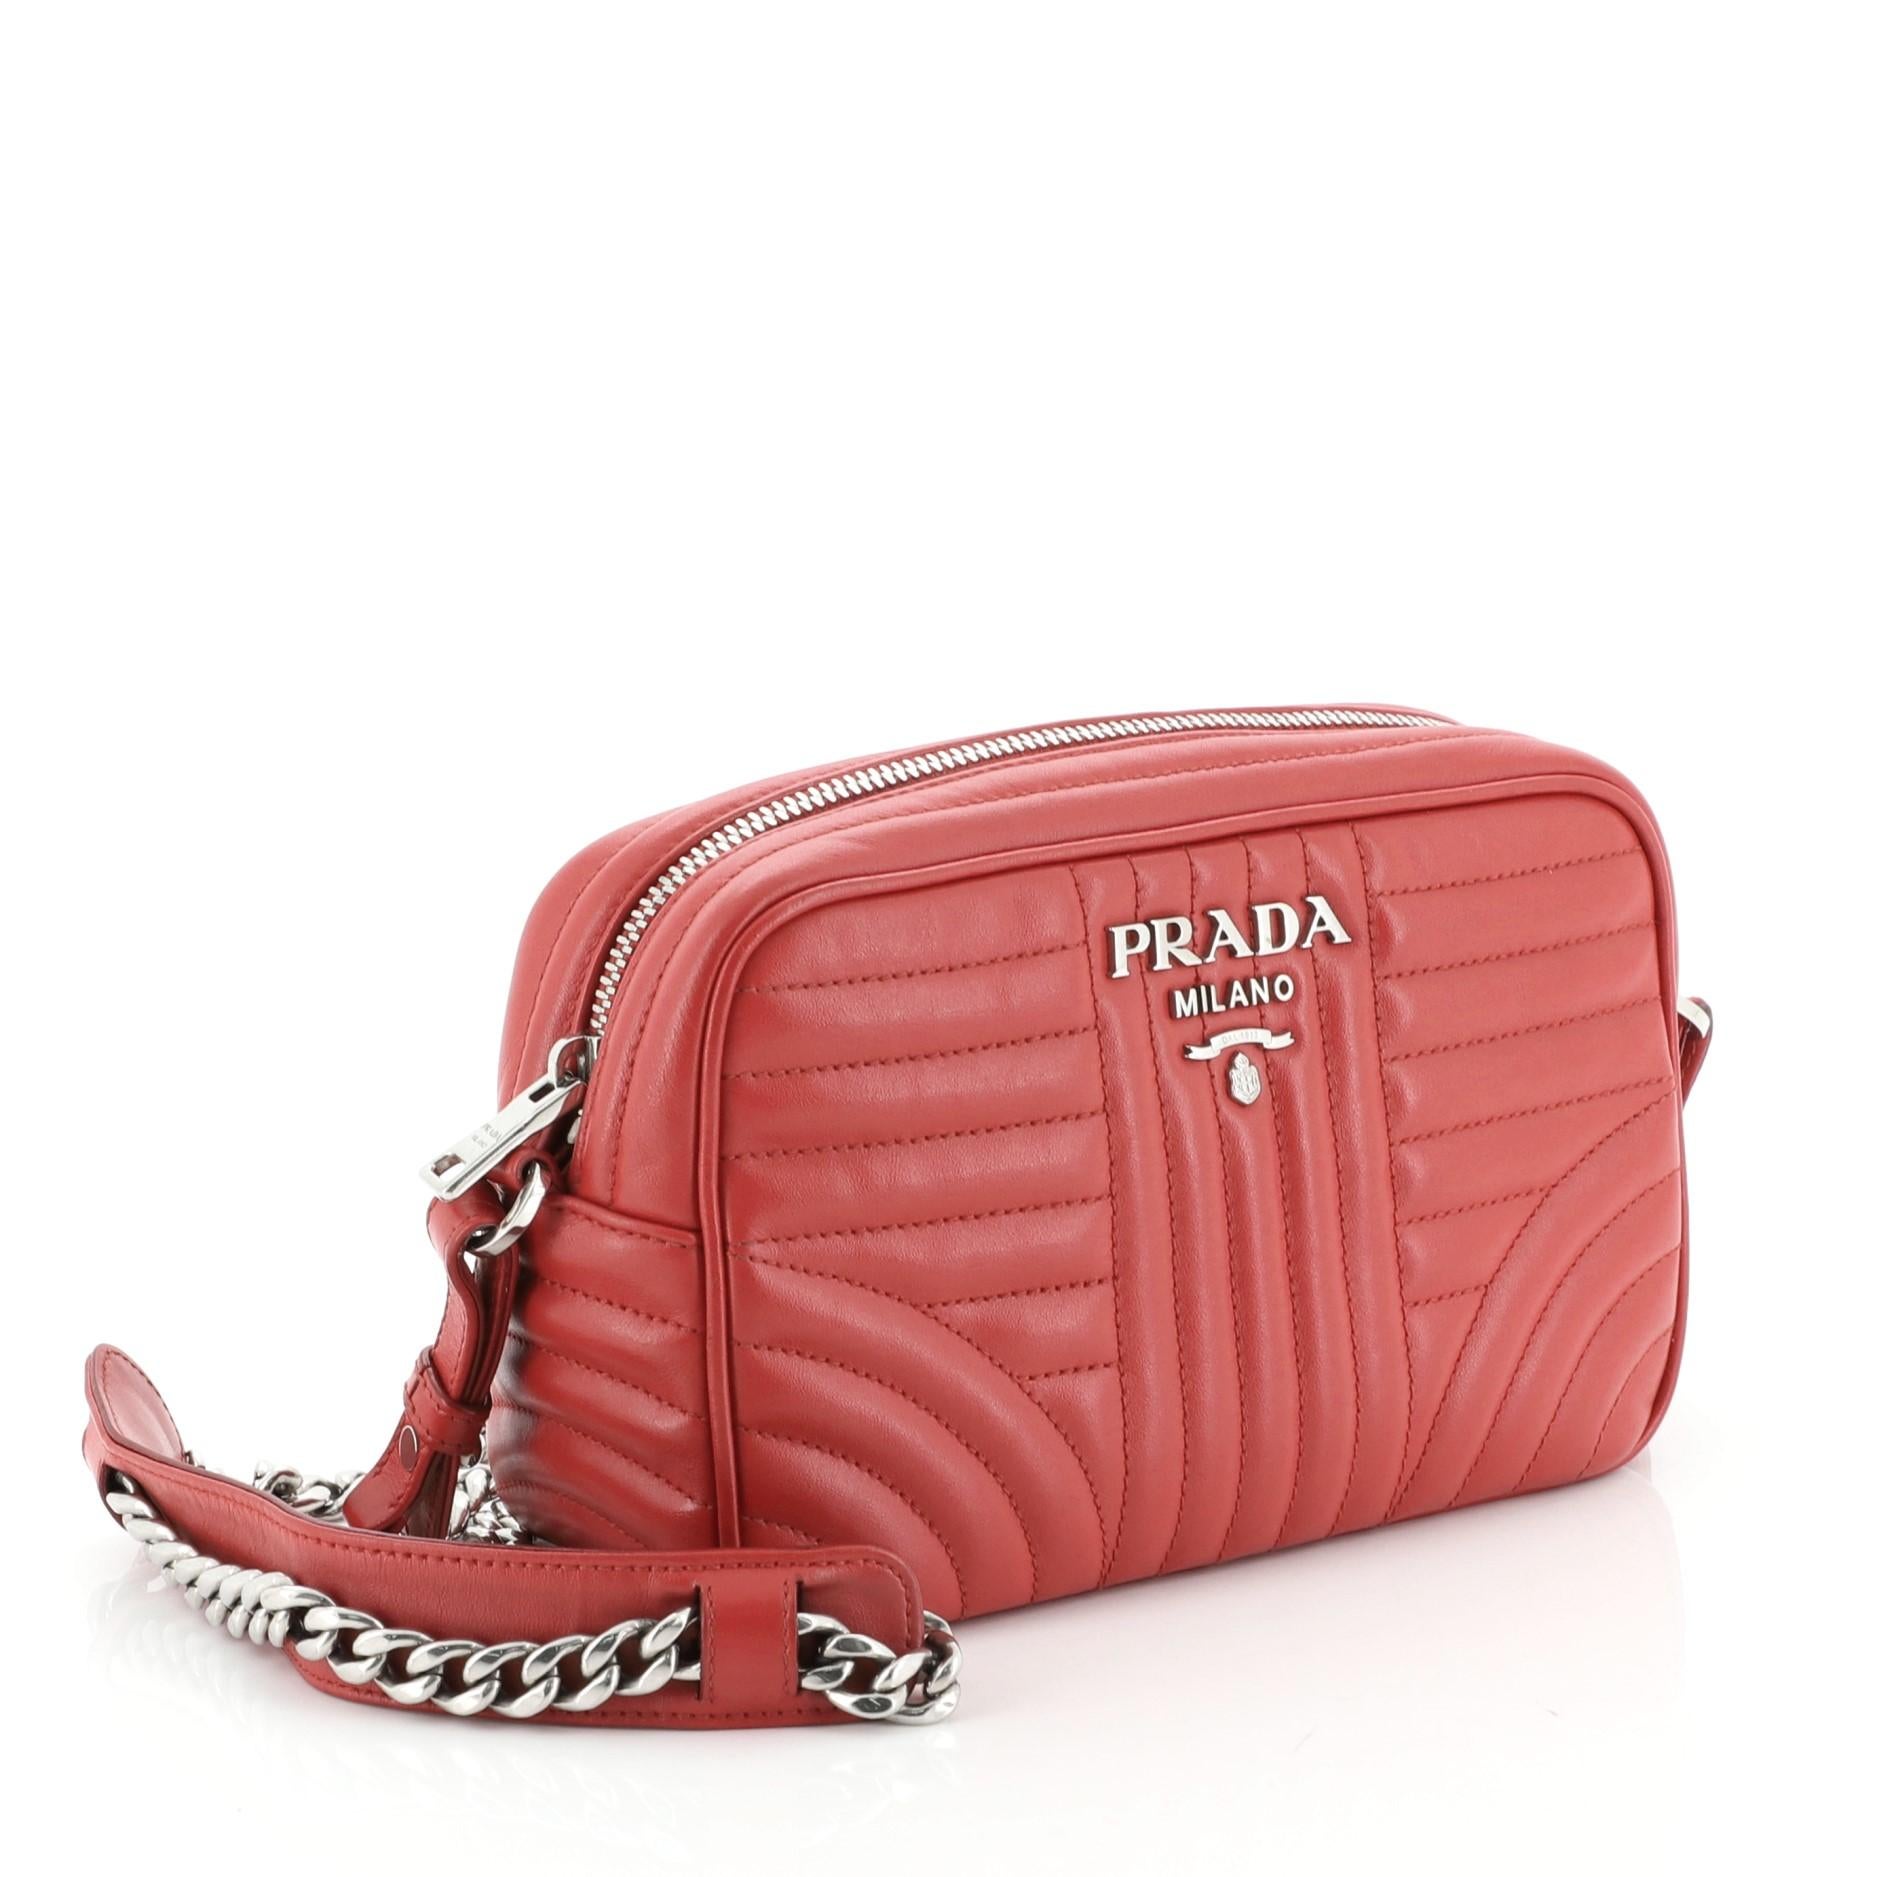 This Prada Camera Bag Diagramme Quilted Leather Small, crafted from red quilted leather, features a chain link strap and silver-tone hardware. Its zip closure opens to a red fabric interior with slip pocket. 

Estimated Retail Price: